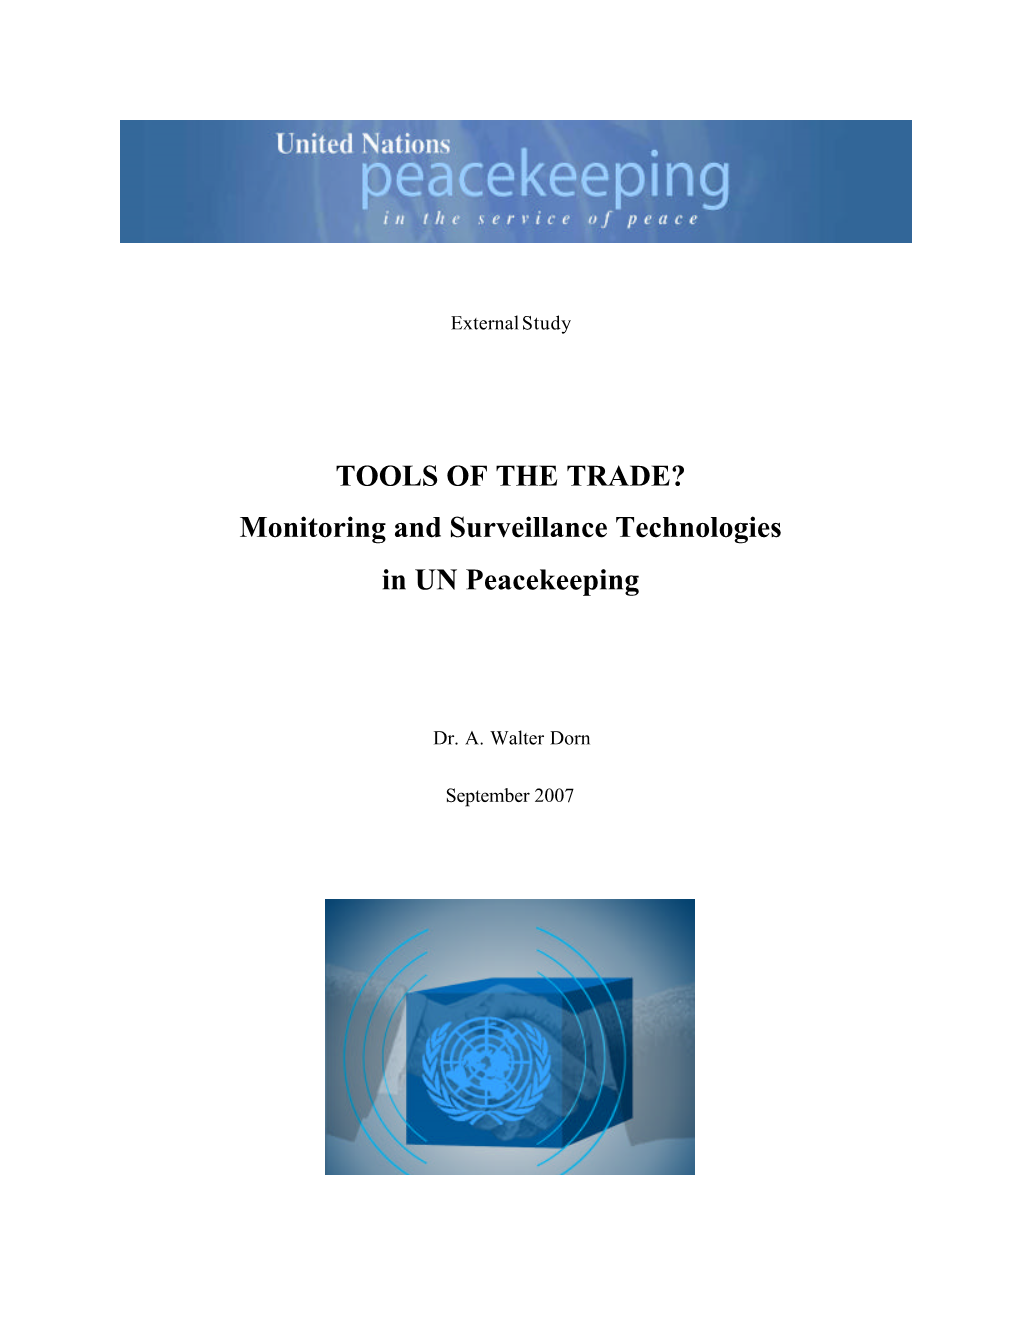 Monitoring and Surveillance Technologies in UN Peacekeeping